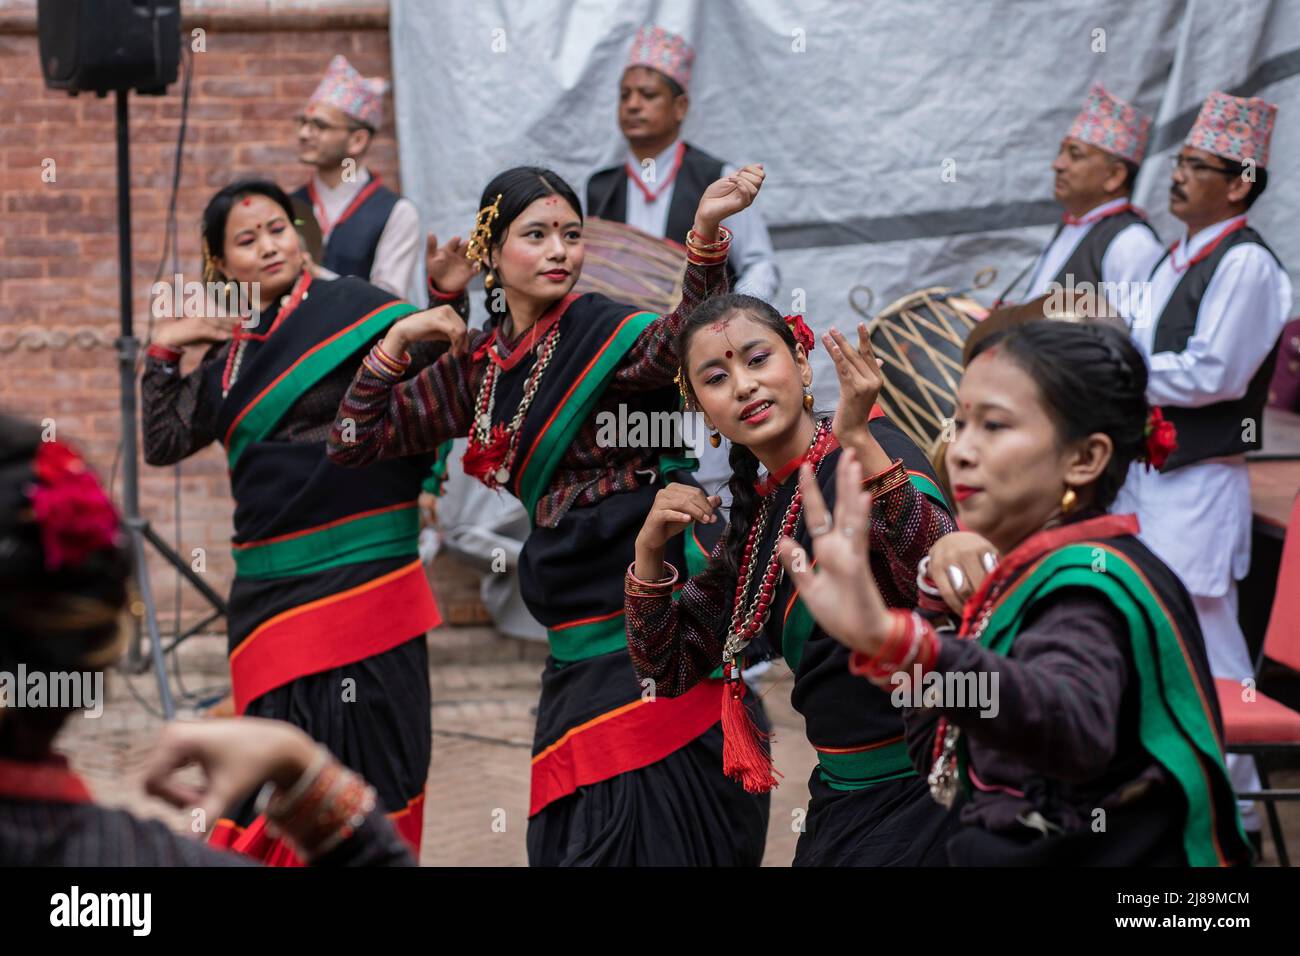 Lalitpur, Nepal. 14th May, 2022. Newar women perform a traditional drum dance during a culture show in Lalitpur, Nepal, May 14, 2022. Credit: Hari Maharjan/Xinhua/Alamy Live News Stock Photo